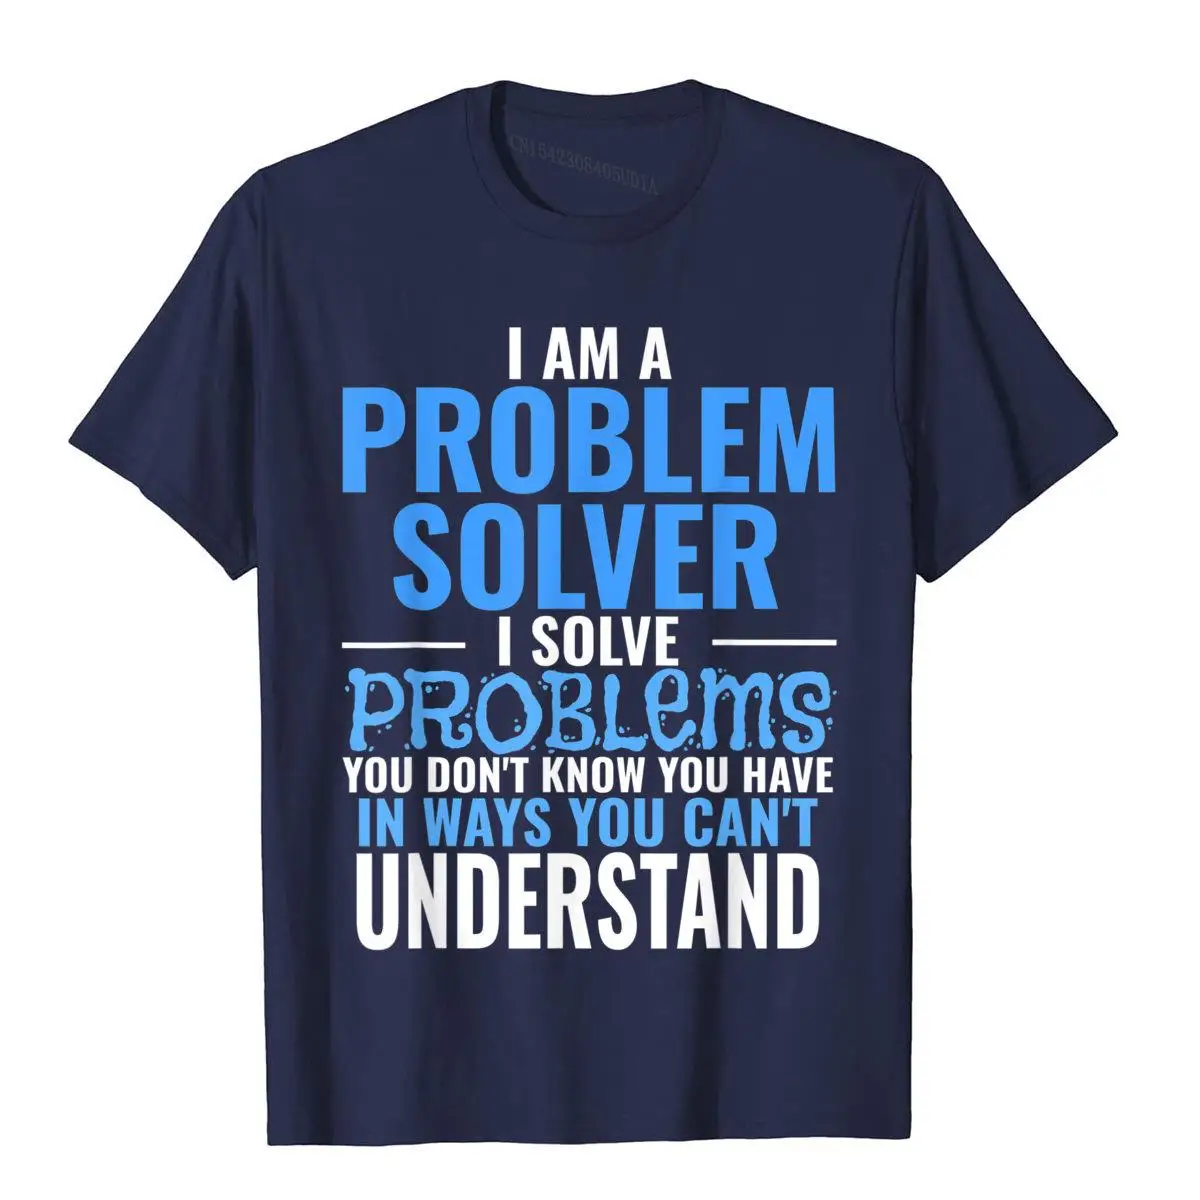 Problem Solve Problems You Don't Know You Have T Shirt B__B8098navy